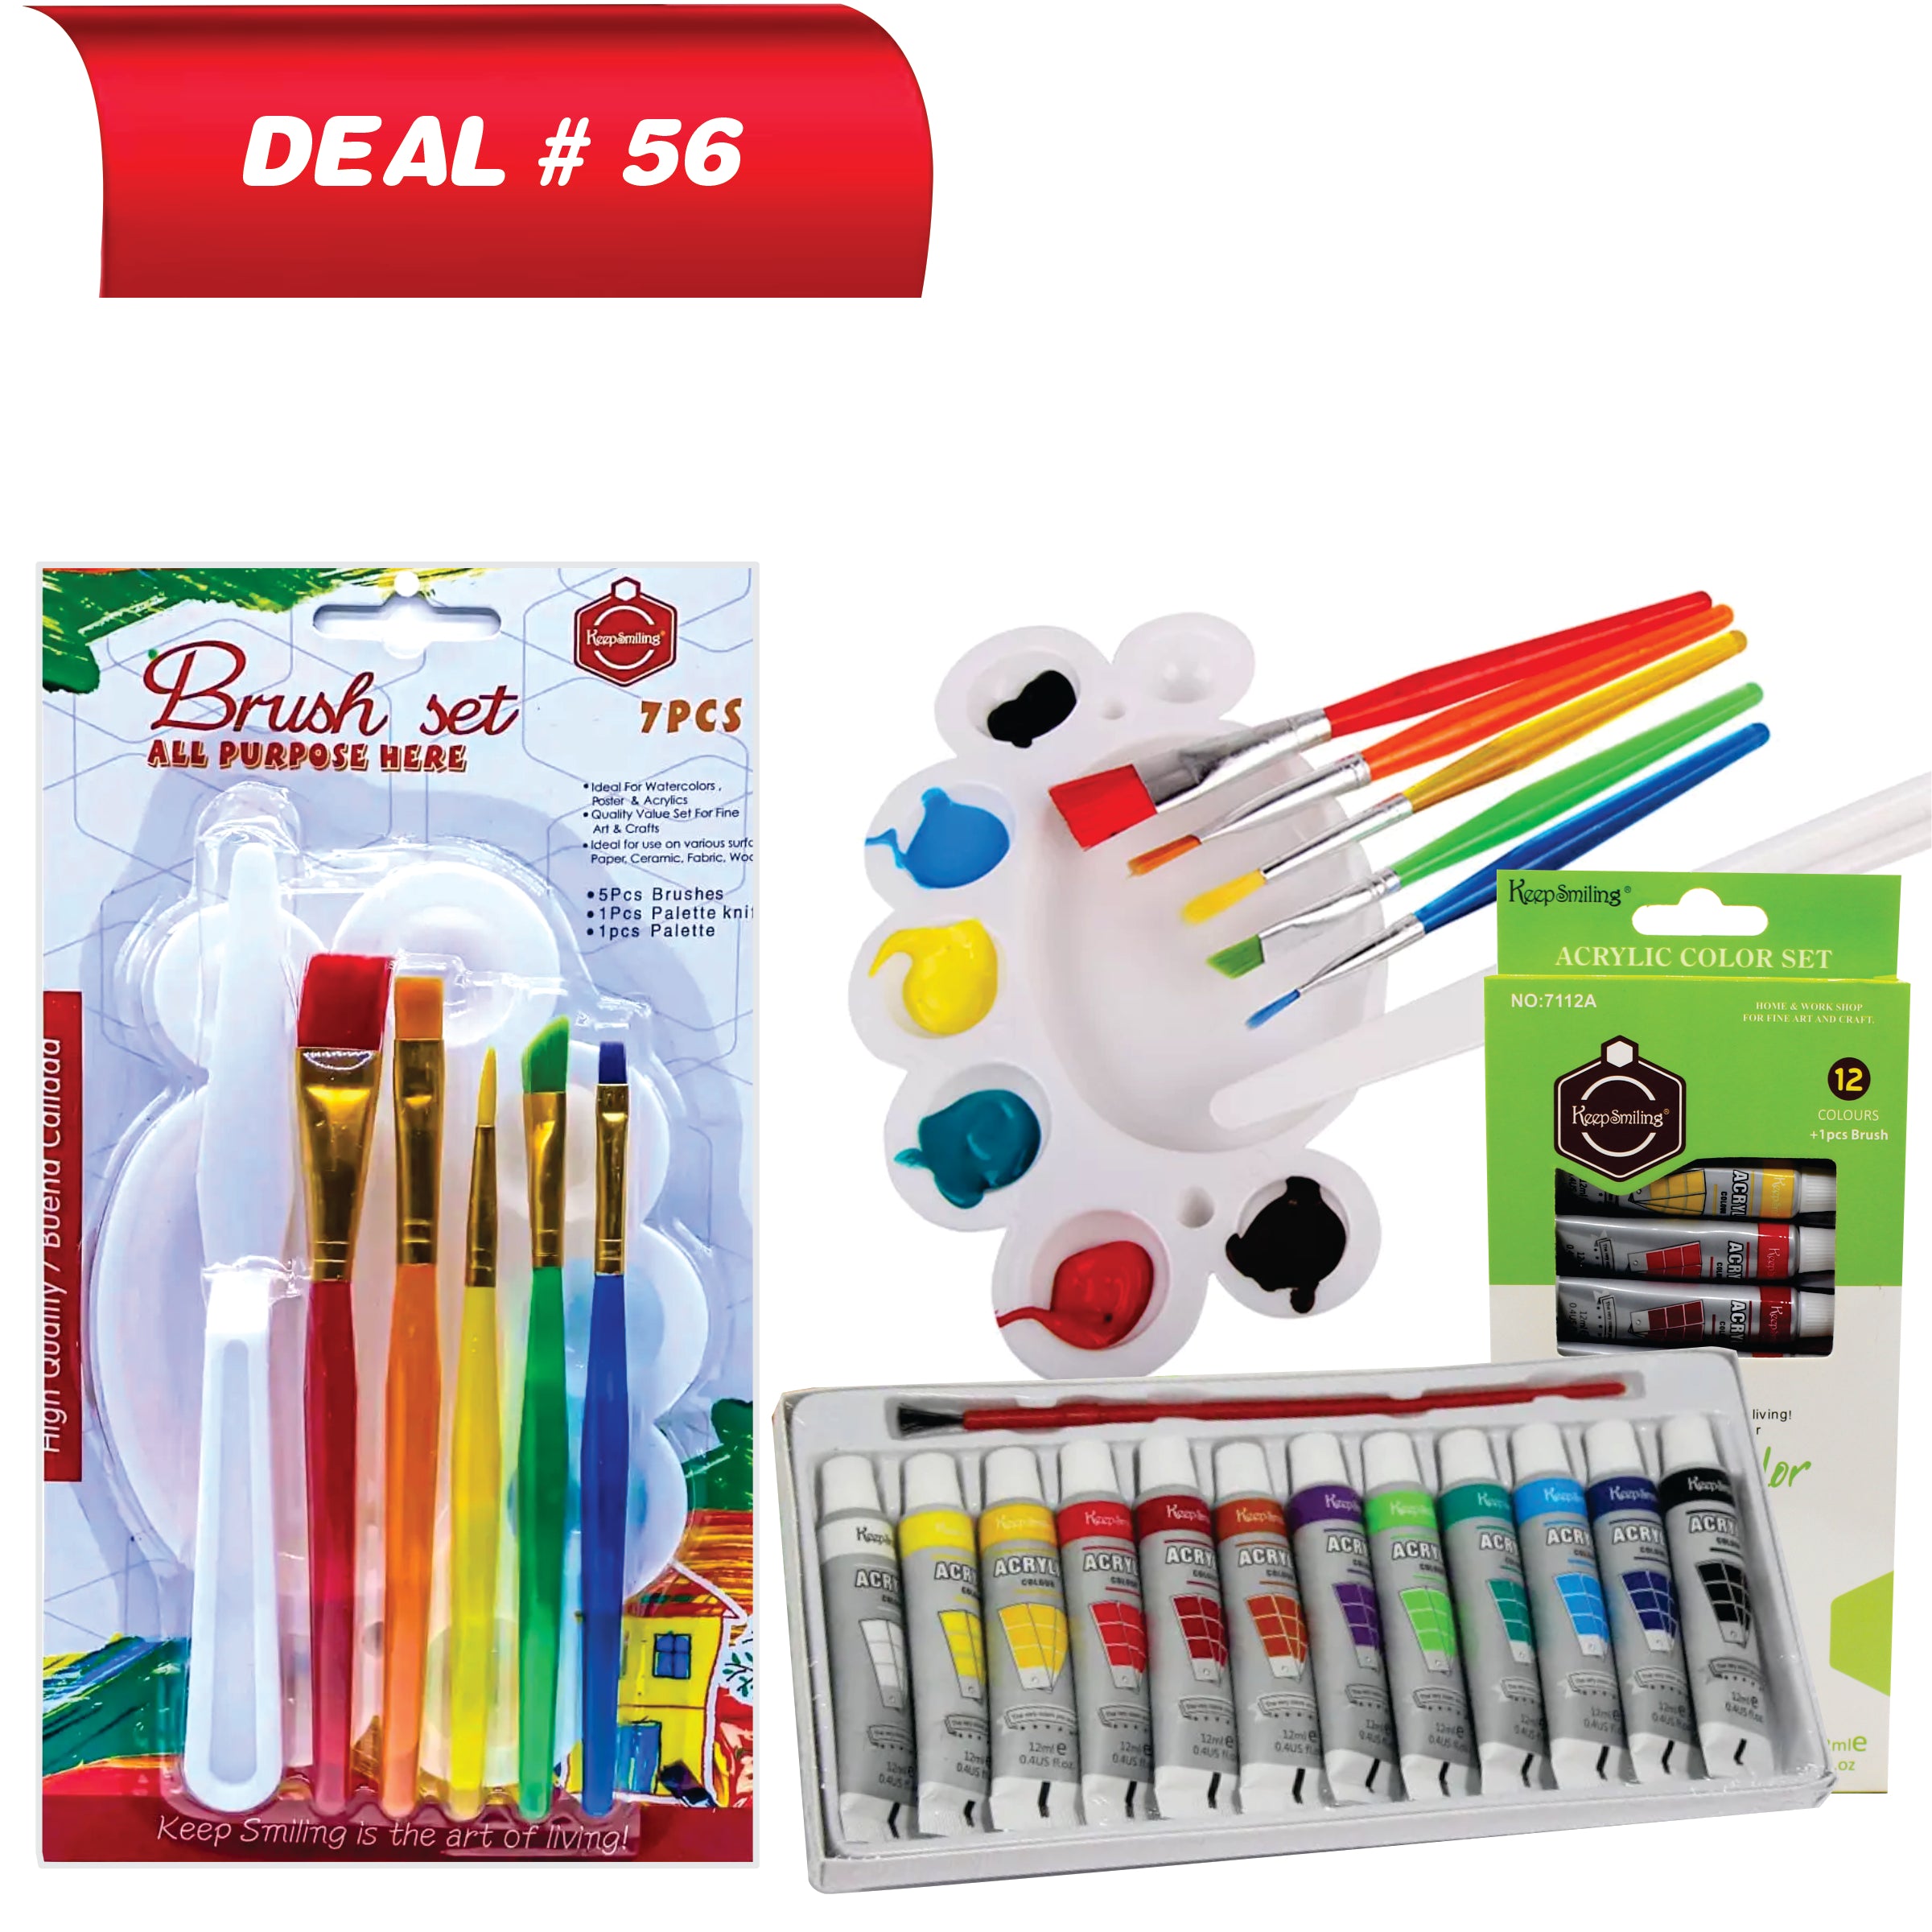 KIds Acrylic Painting Kit, Deal No.56